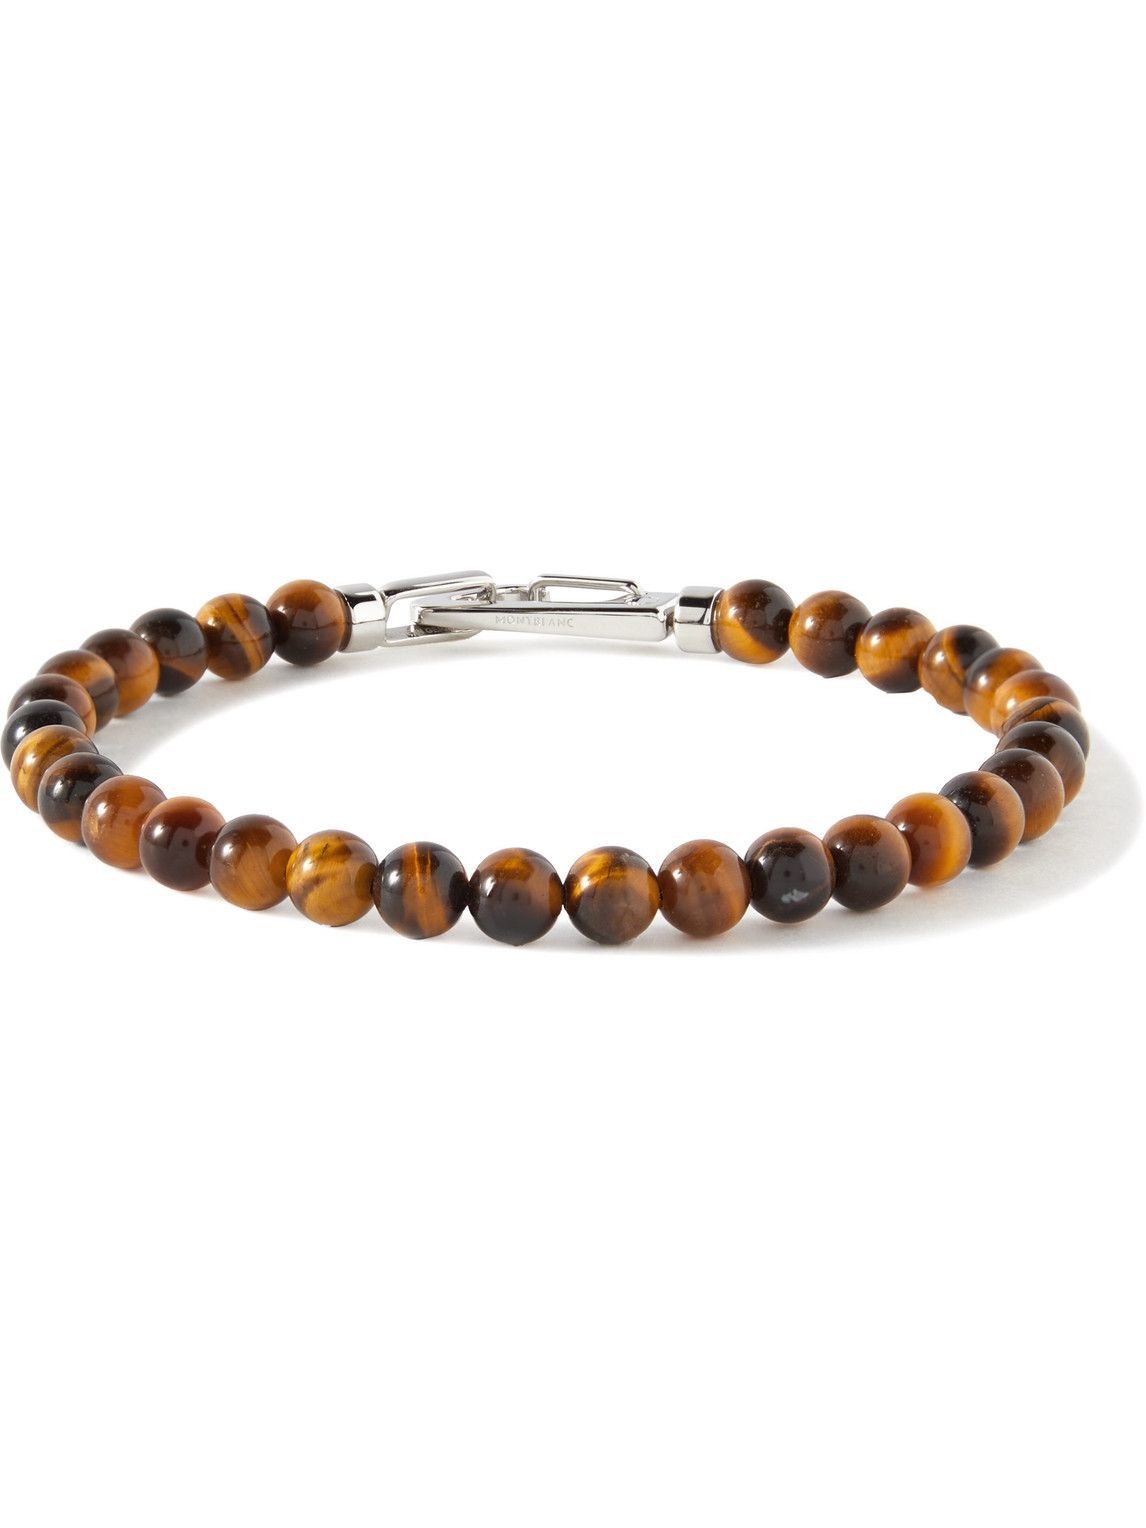 Photo: Montblanc - Tiger's Eye and Stainless Steel Beaded Bracelet - Silver